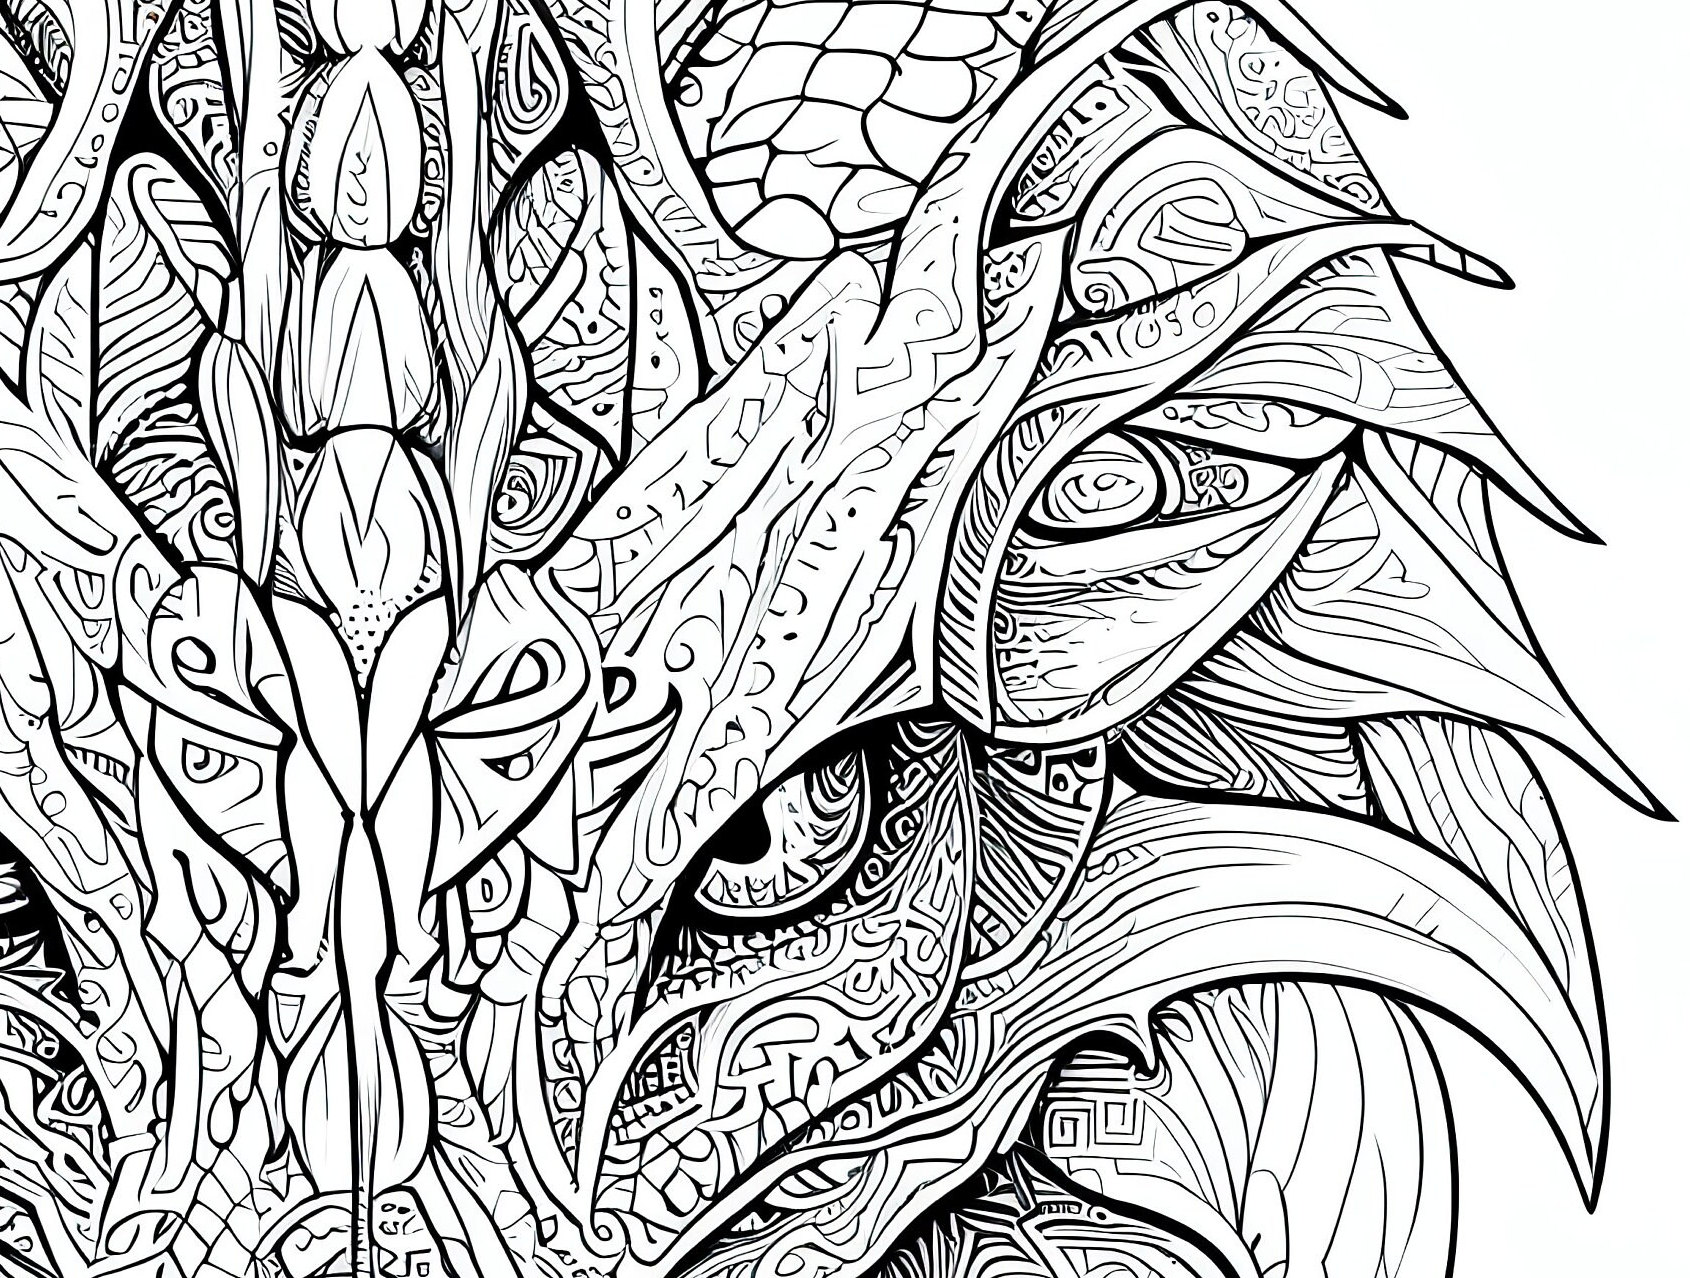 Adult Coloring Book Stress Buster Coloring Design: Animal Coloring Book for  Adults to relieve stress Adult Coloring Books, Coloring Pages for Adults,  (Paperback)